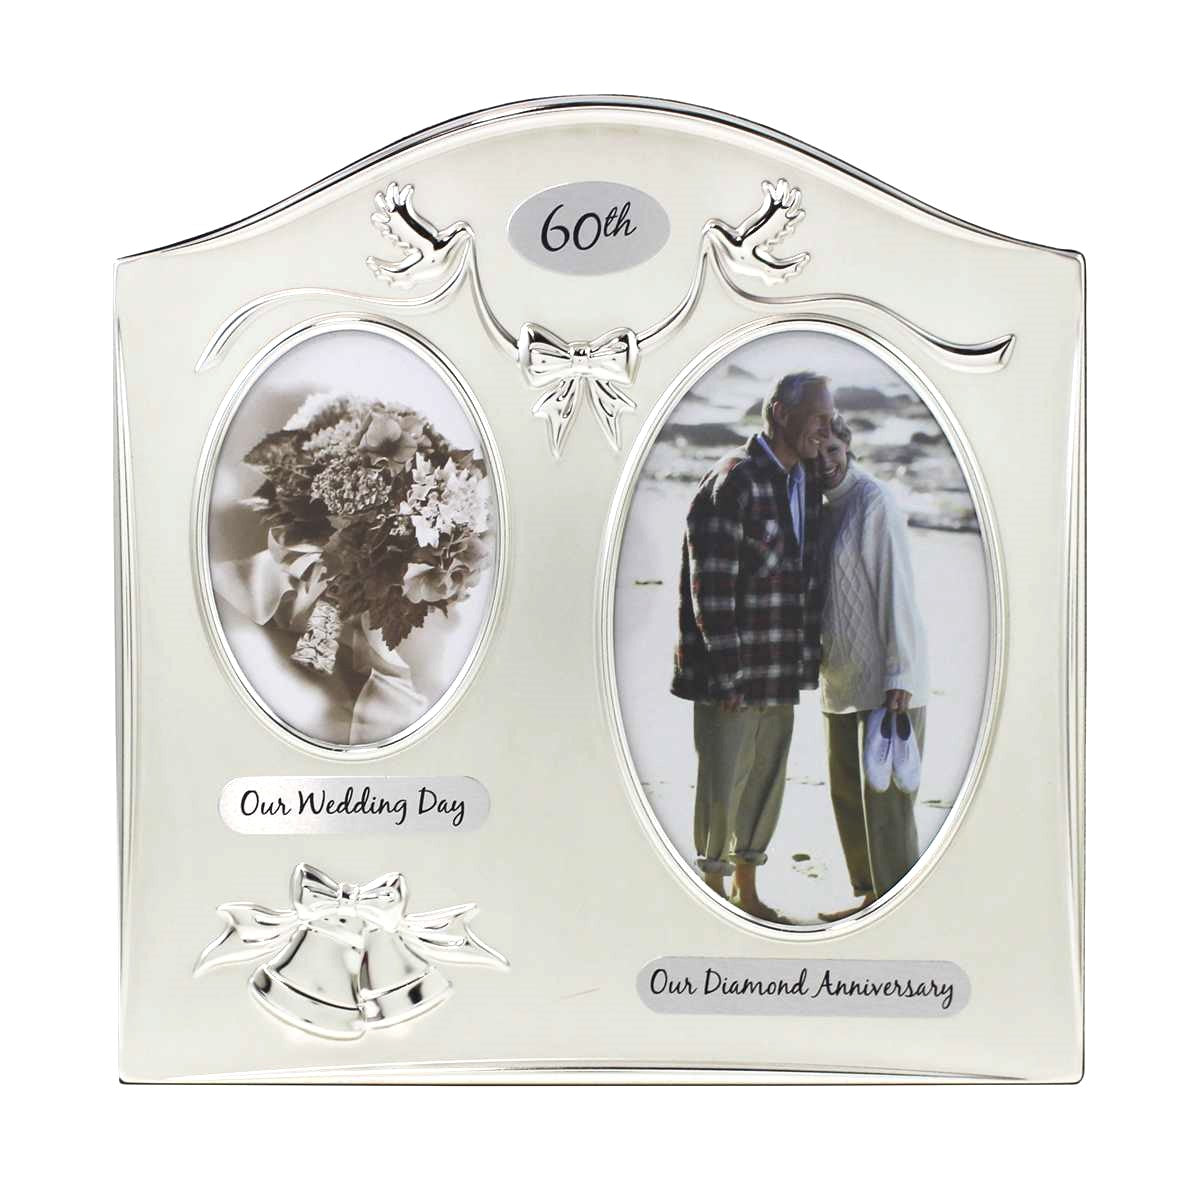 60th Anniversary Picture Frame Double The perfect Diamond Anniversary Gift